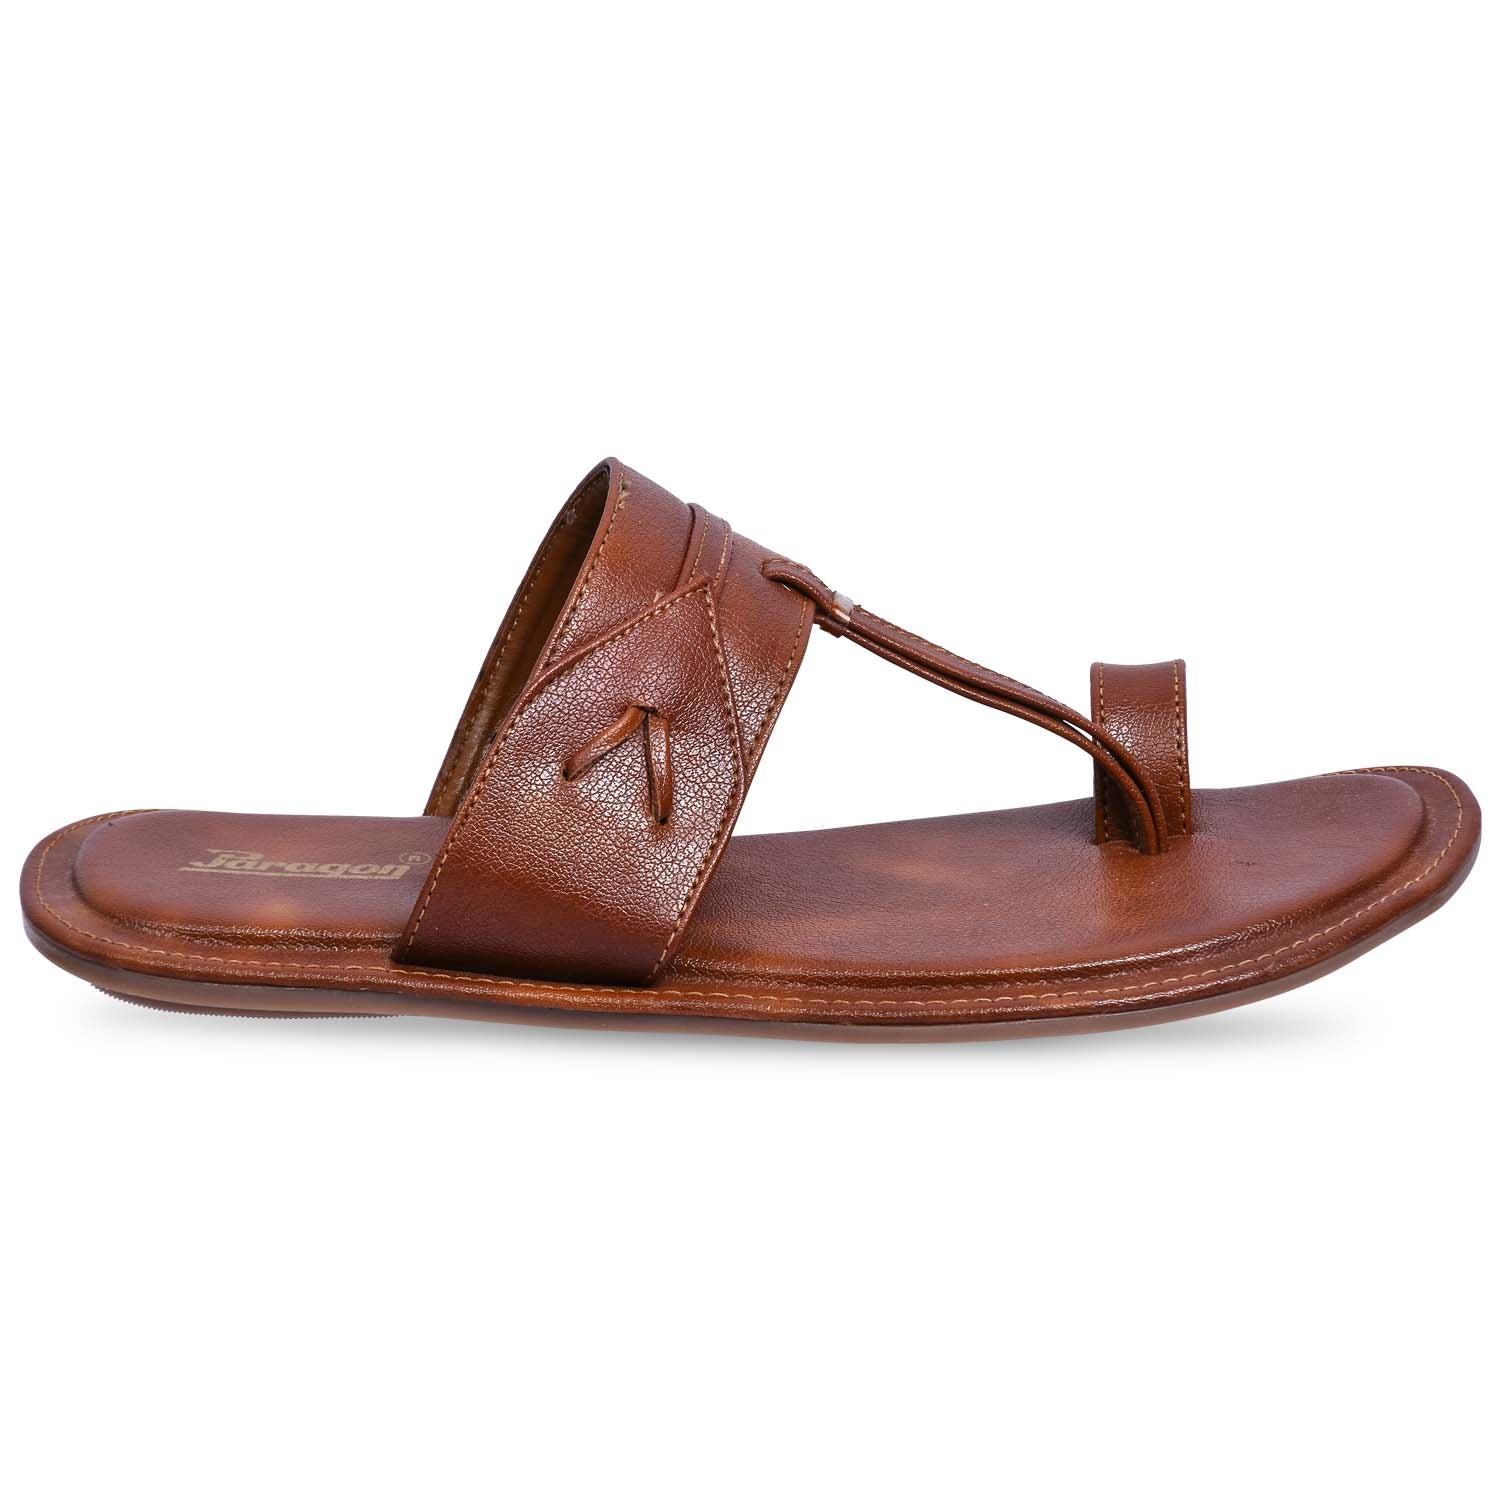 Paragon R4001G Men Stylish Sandals | Comfortable Sandals for Daily Outdoor Use | Casual Formal Sandals with Cushioned Soles